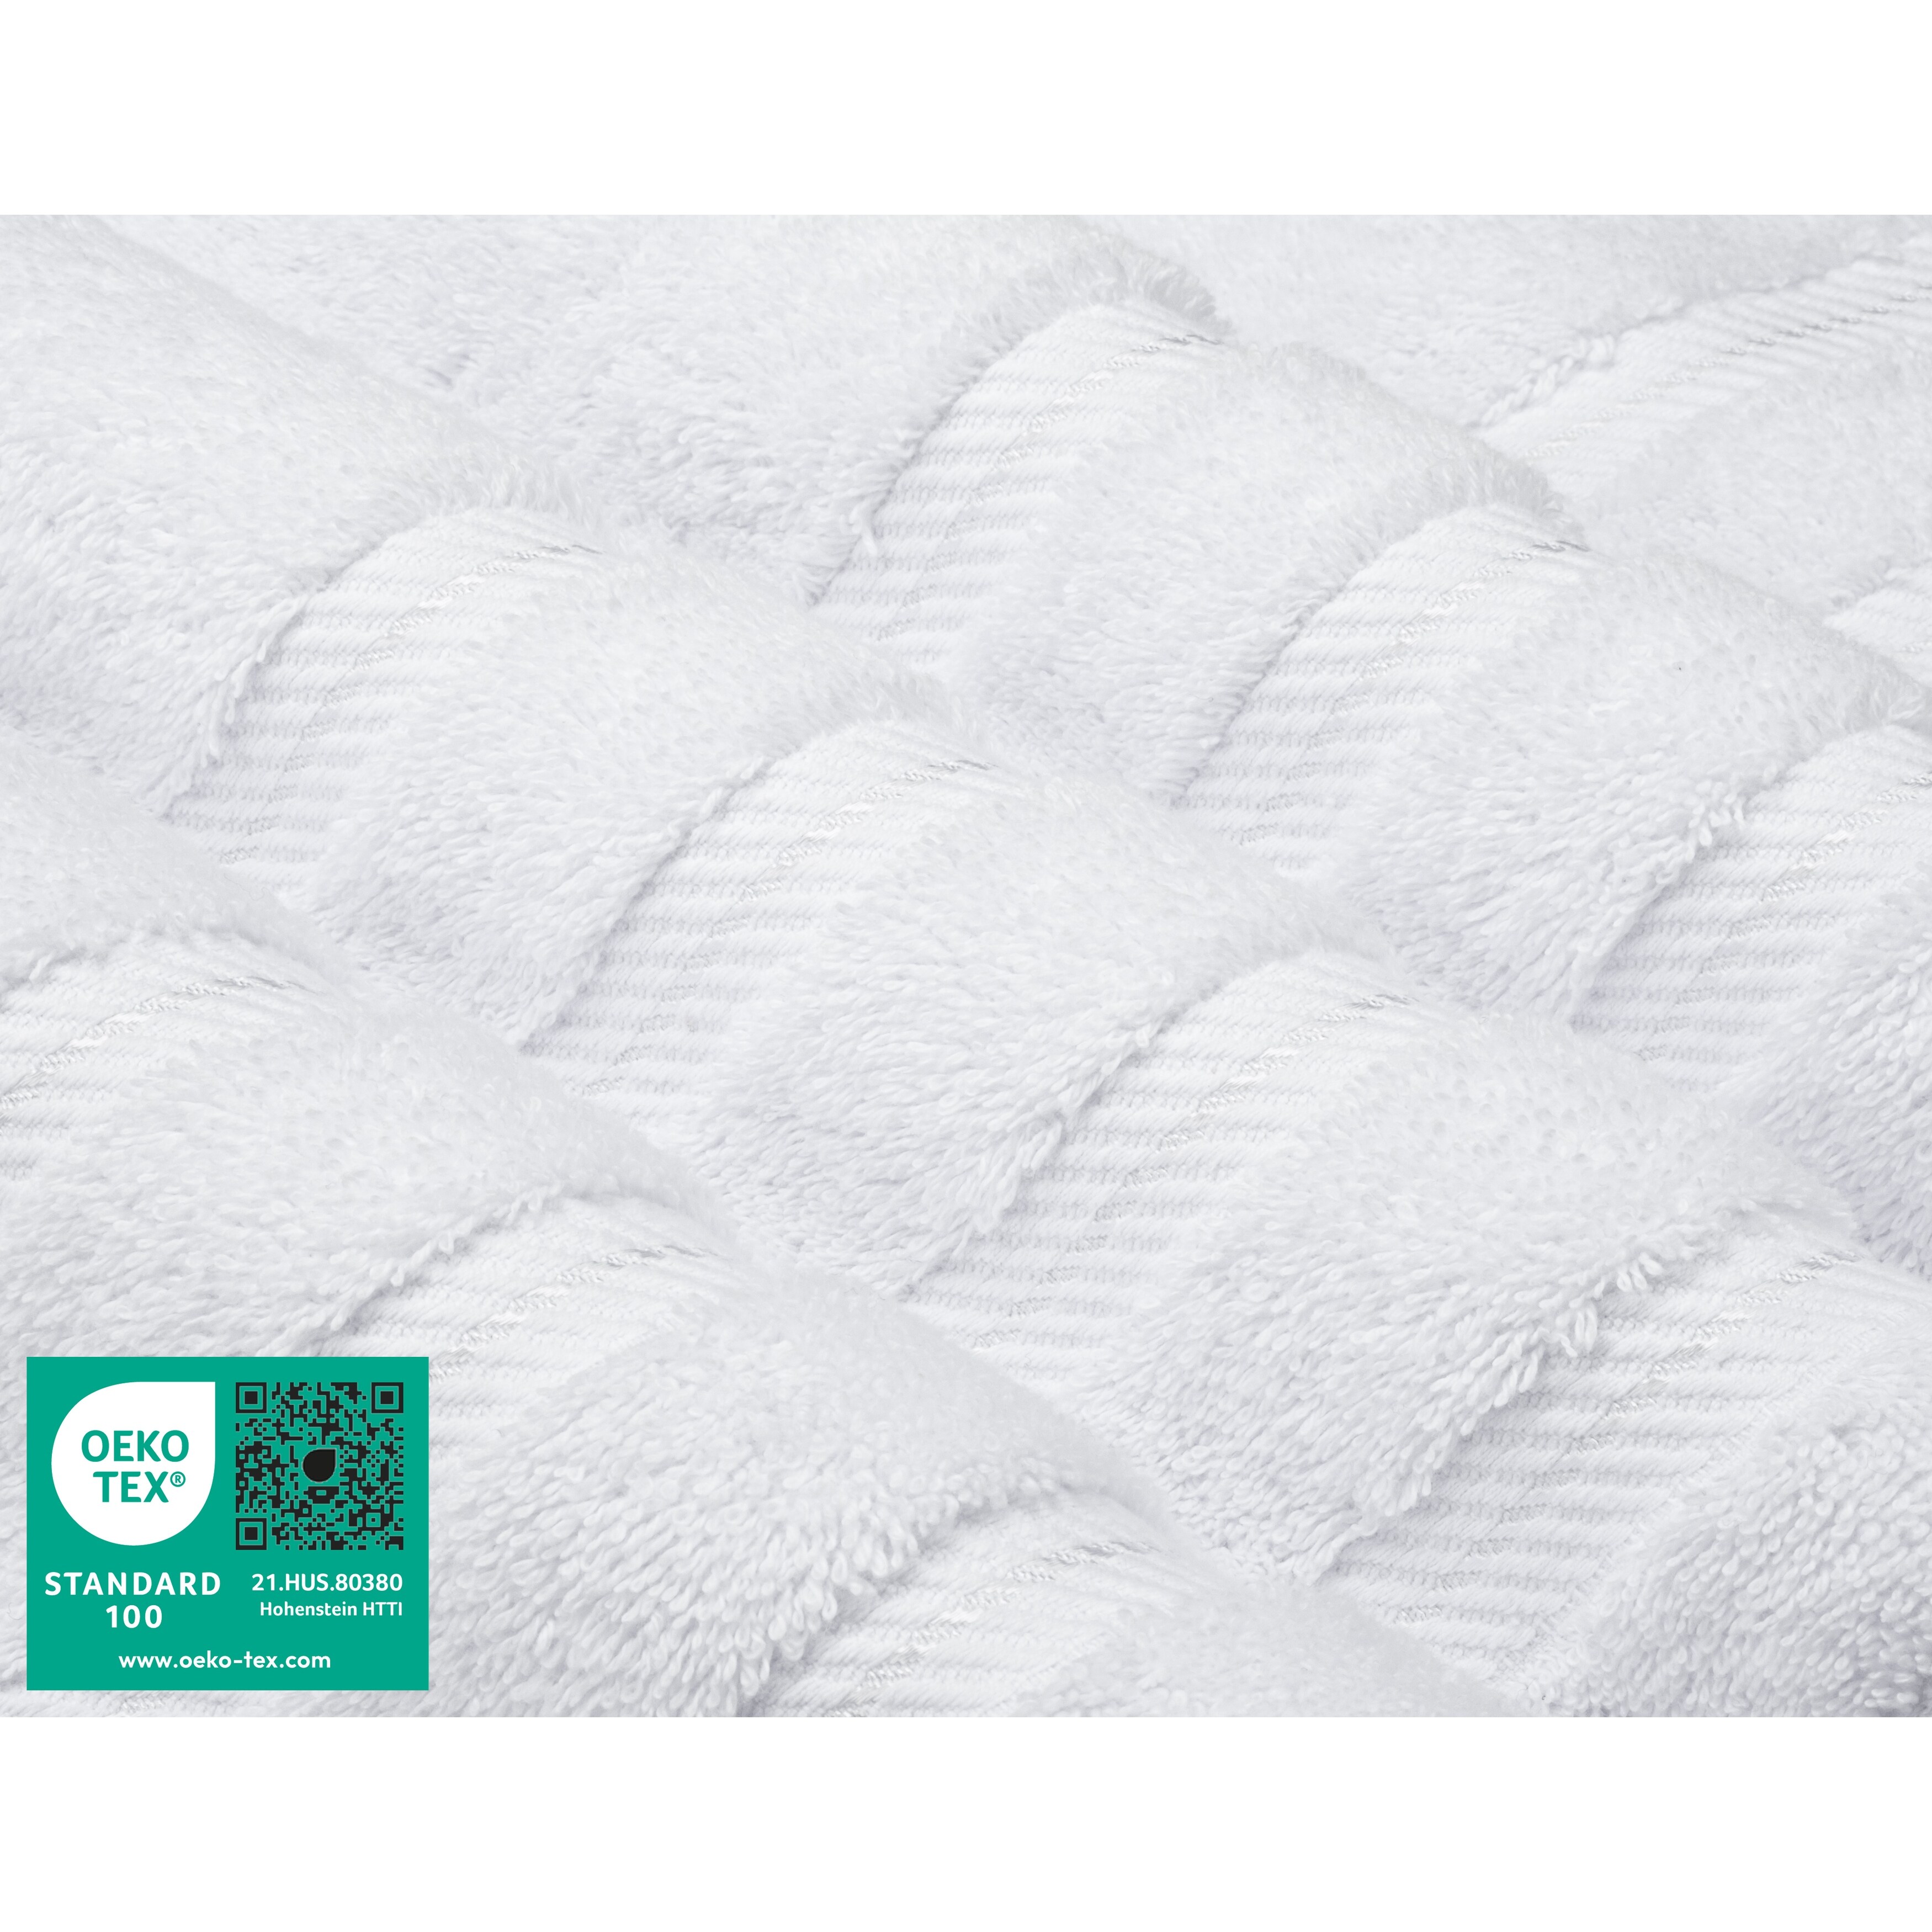 4 Pack Cotton Bath Mat for Bathroom Floor Towel - Turkish Bath Mat Set of  4-100% Cotton Reversible Washable Absorbent Feet Towel 18 X 34 Inches White